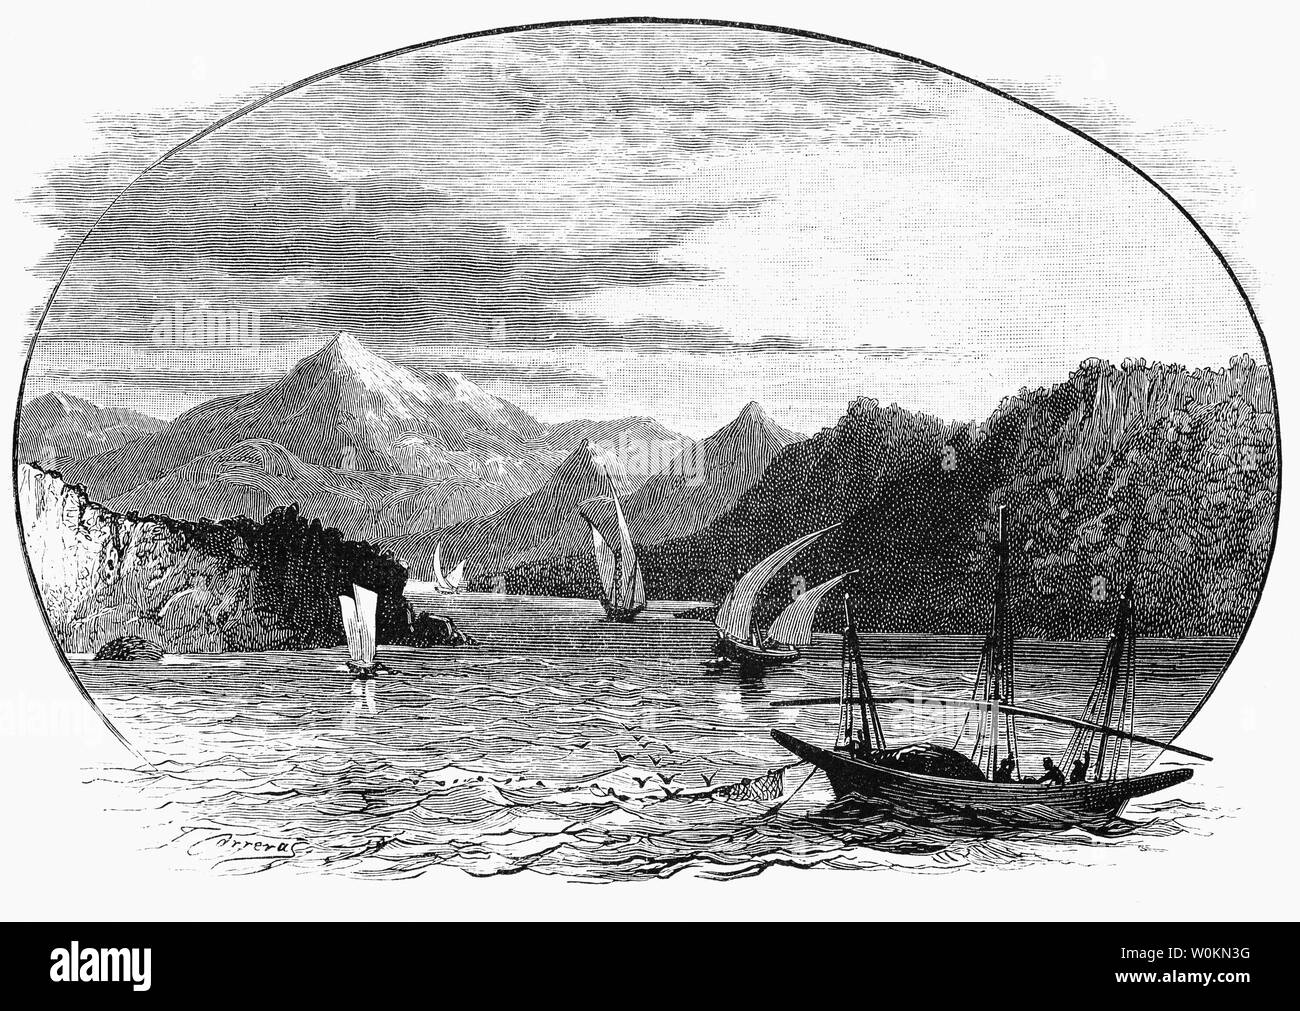 A 19th Century view of the site of  the naval Battle of Salamis fought in the straits between the mainland and Salamis, an island in the Saronic Gulf near Piraeus. The battle marked the high-point of the second Persian invasion of Greece was fought between an alliance of Greek city-states under Themistocles and the Persian Empire under King Xerxes I in 480 BC and resulted in a decisive victory for the outnumbered Greeks Stock Photo